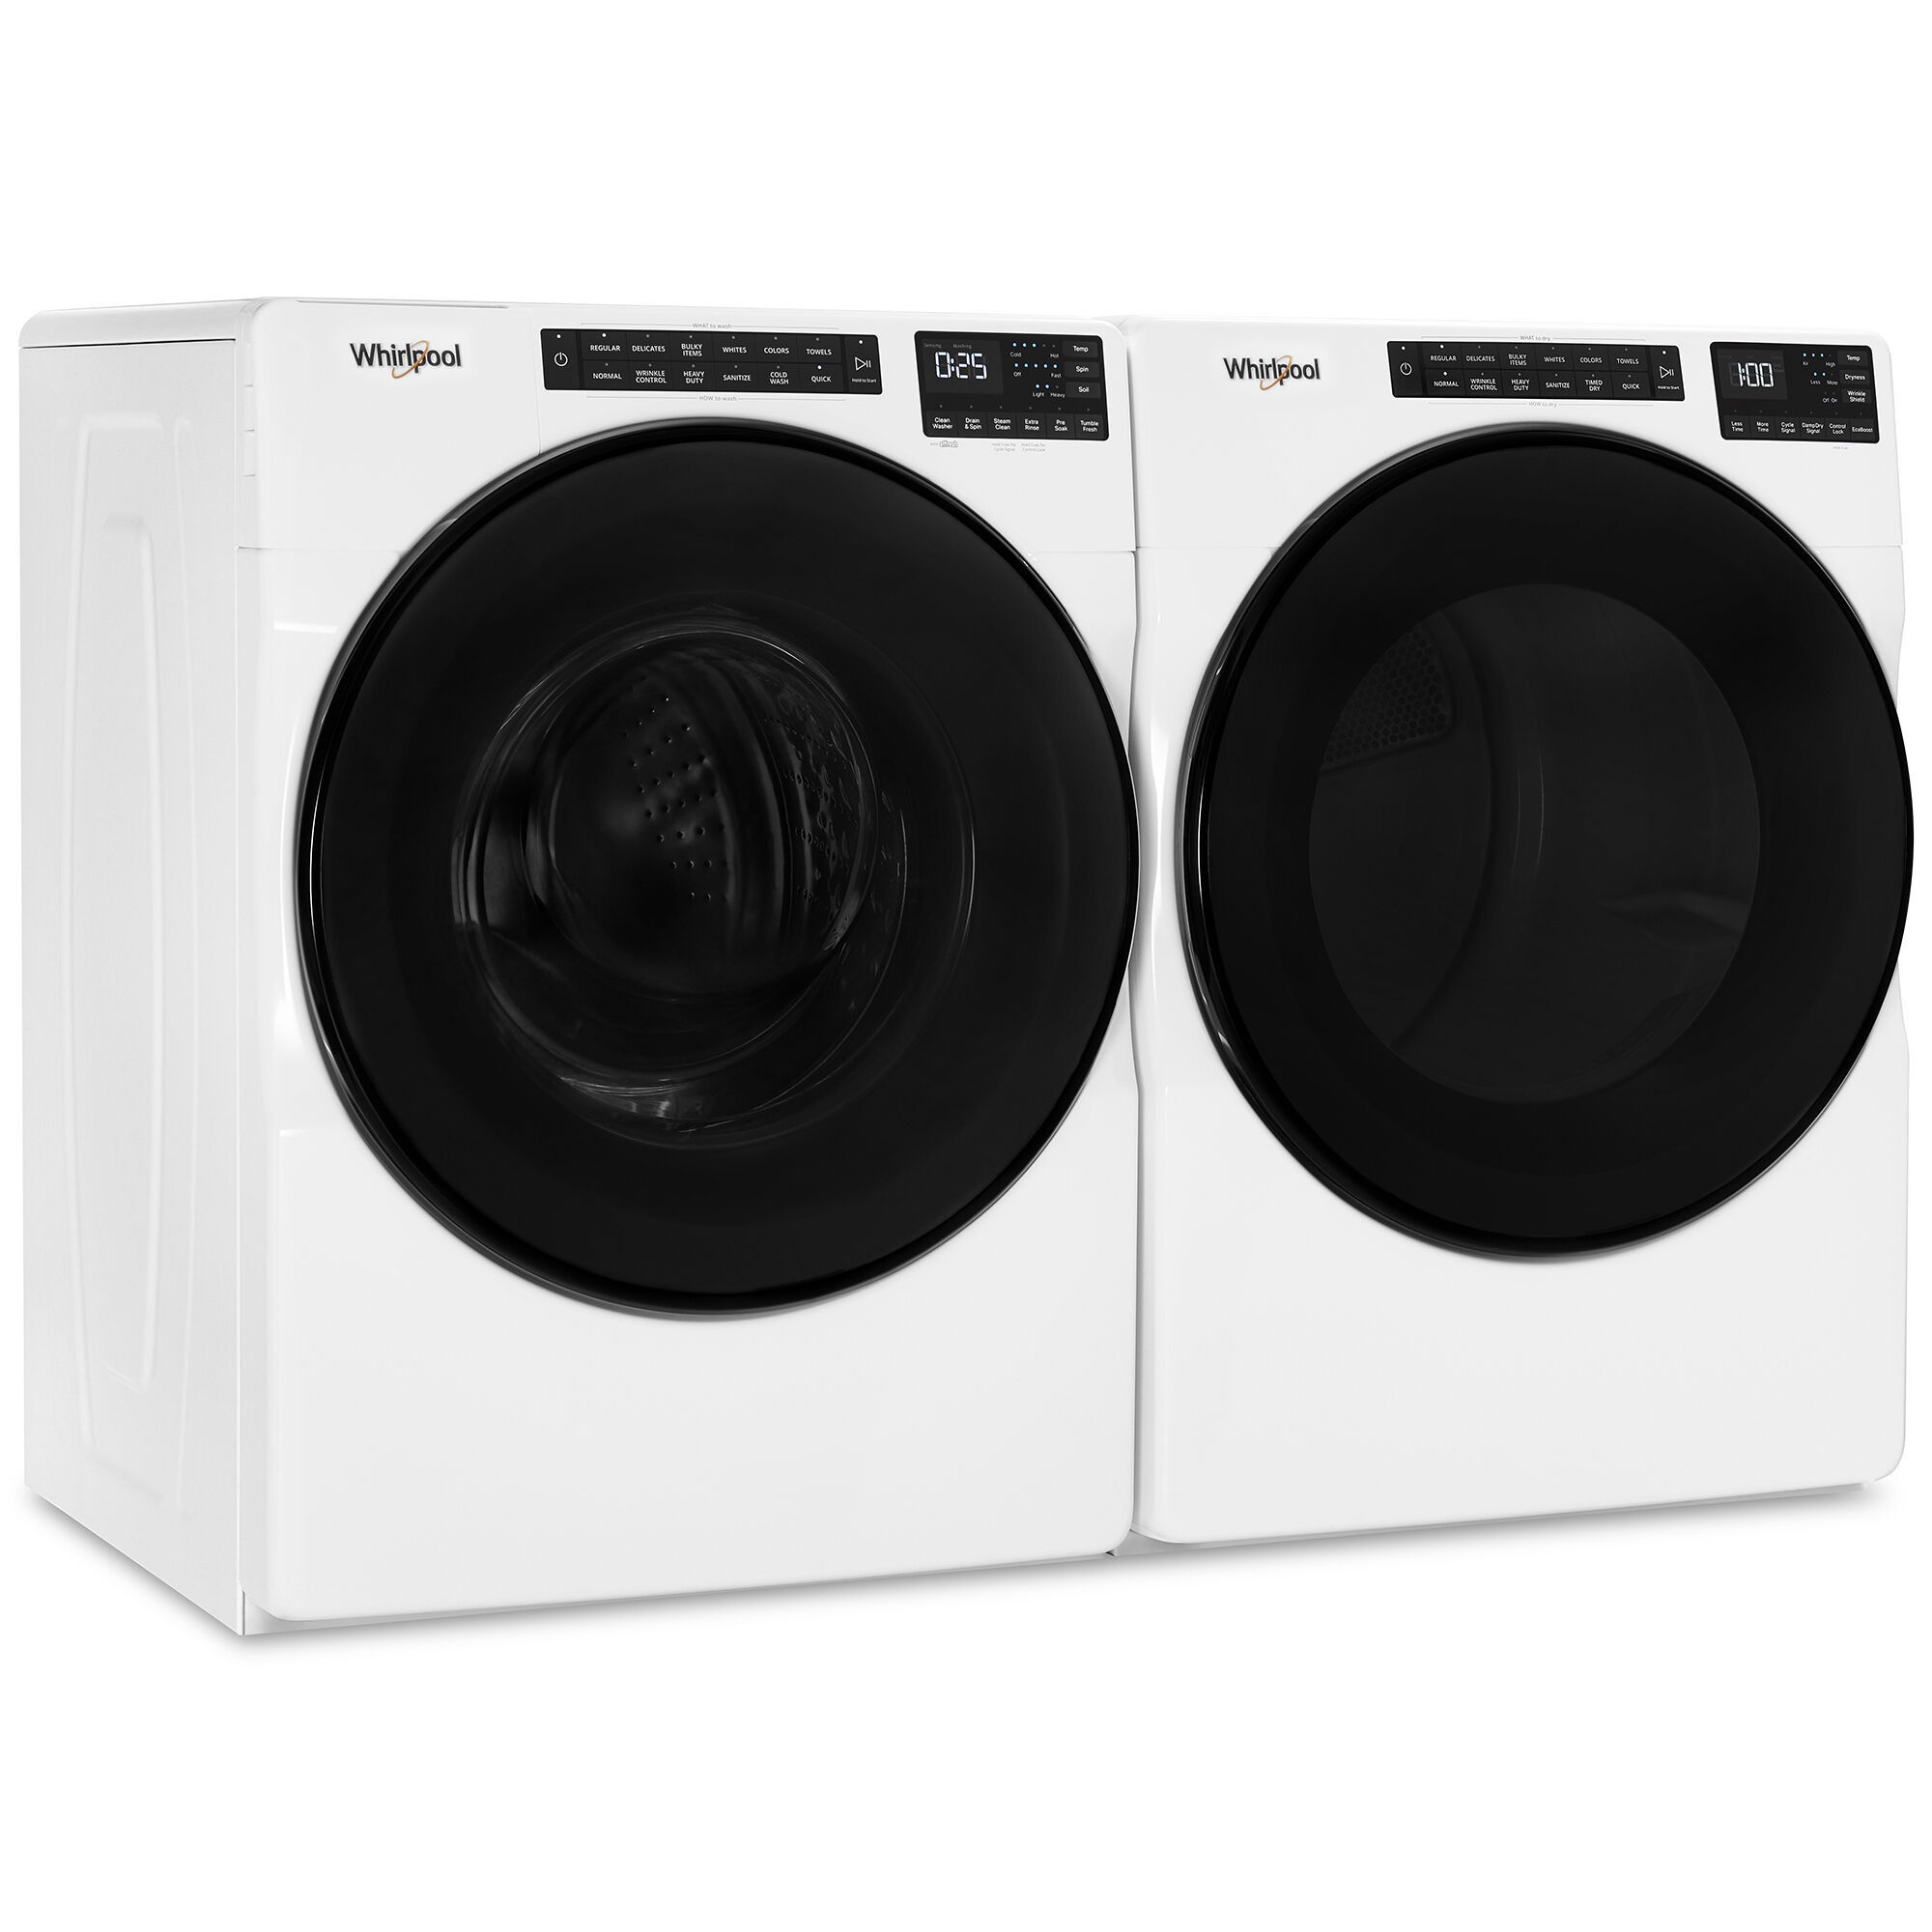 Whirlpool 27 in. 7.4 cu. ft. Stackable Gas Dryer with 36 Dryer 